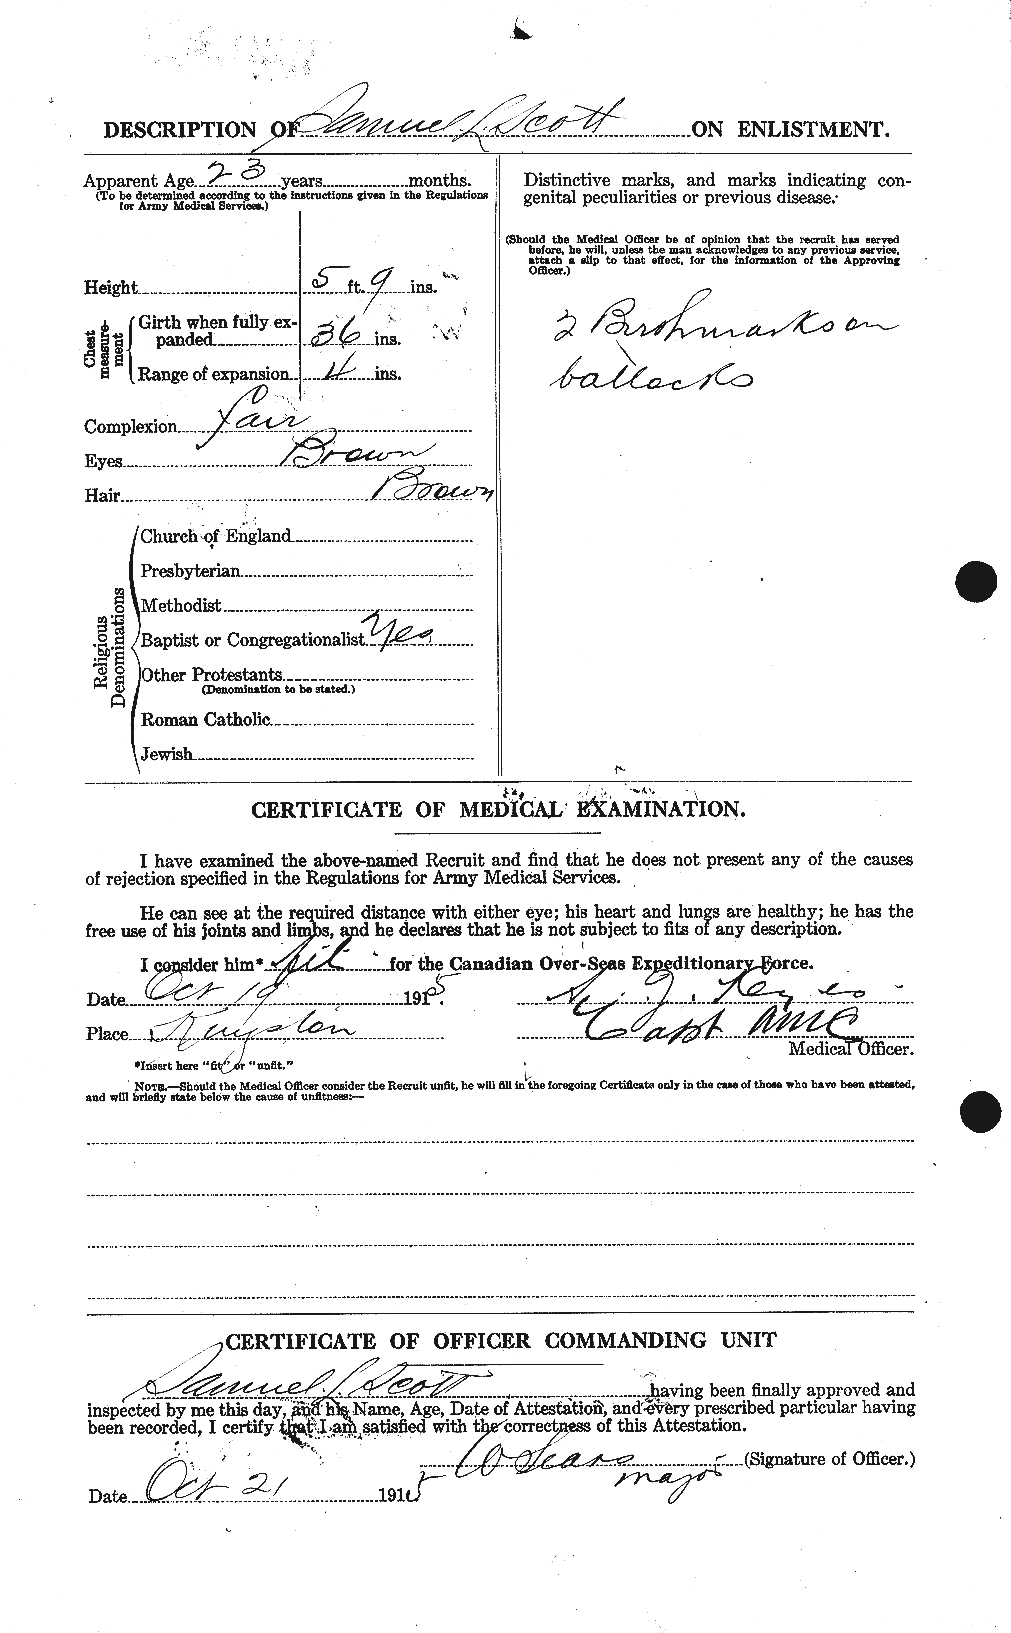 Personnel Records of the First World War - CEF 088856b